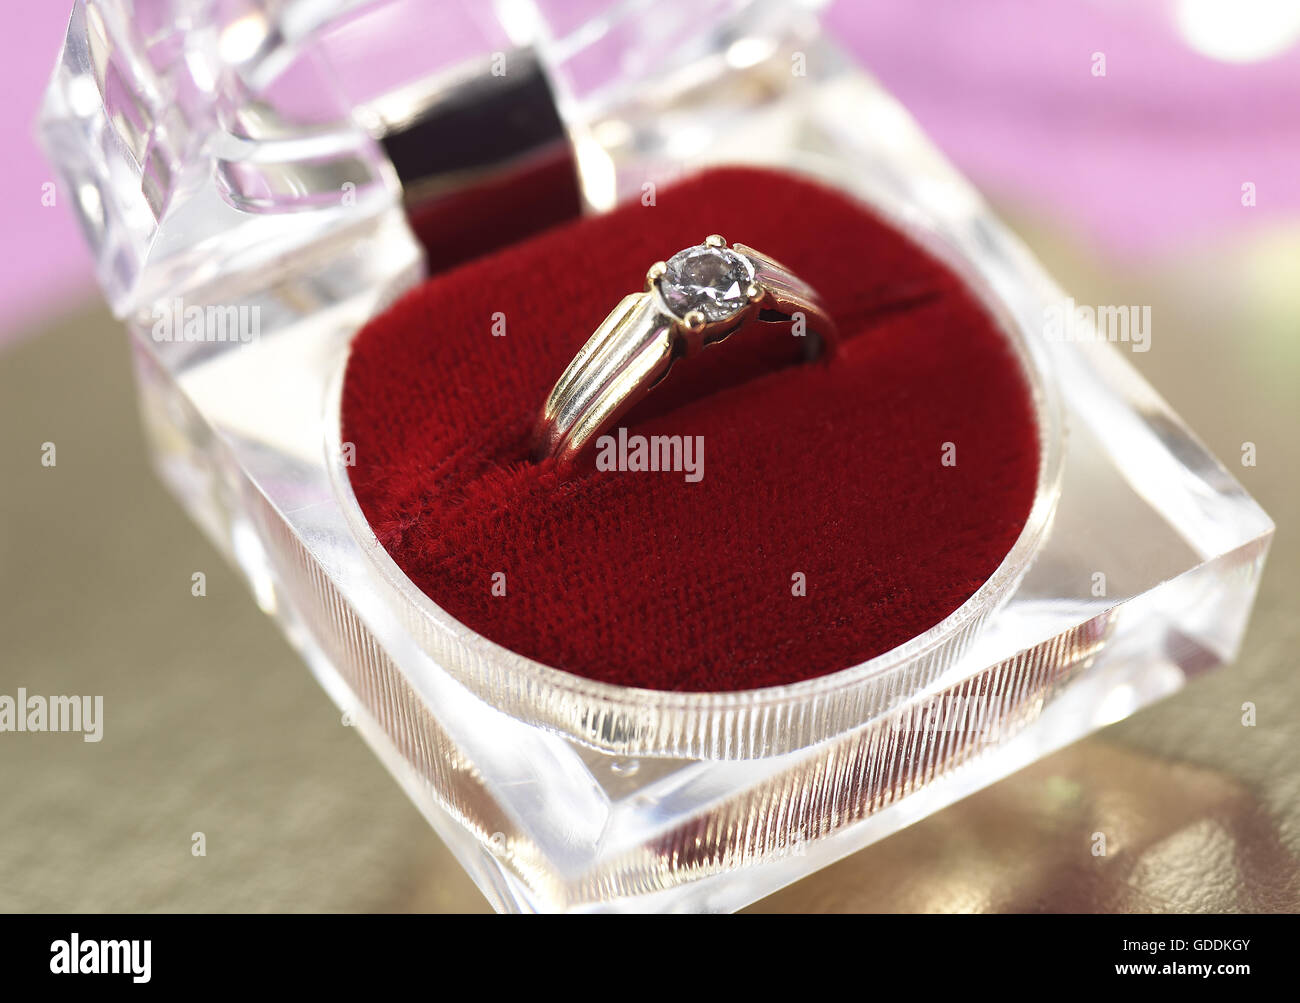 DIAMOND RING, GIFT FOR VALENTINE'S DAY Stock Photo